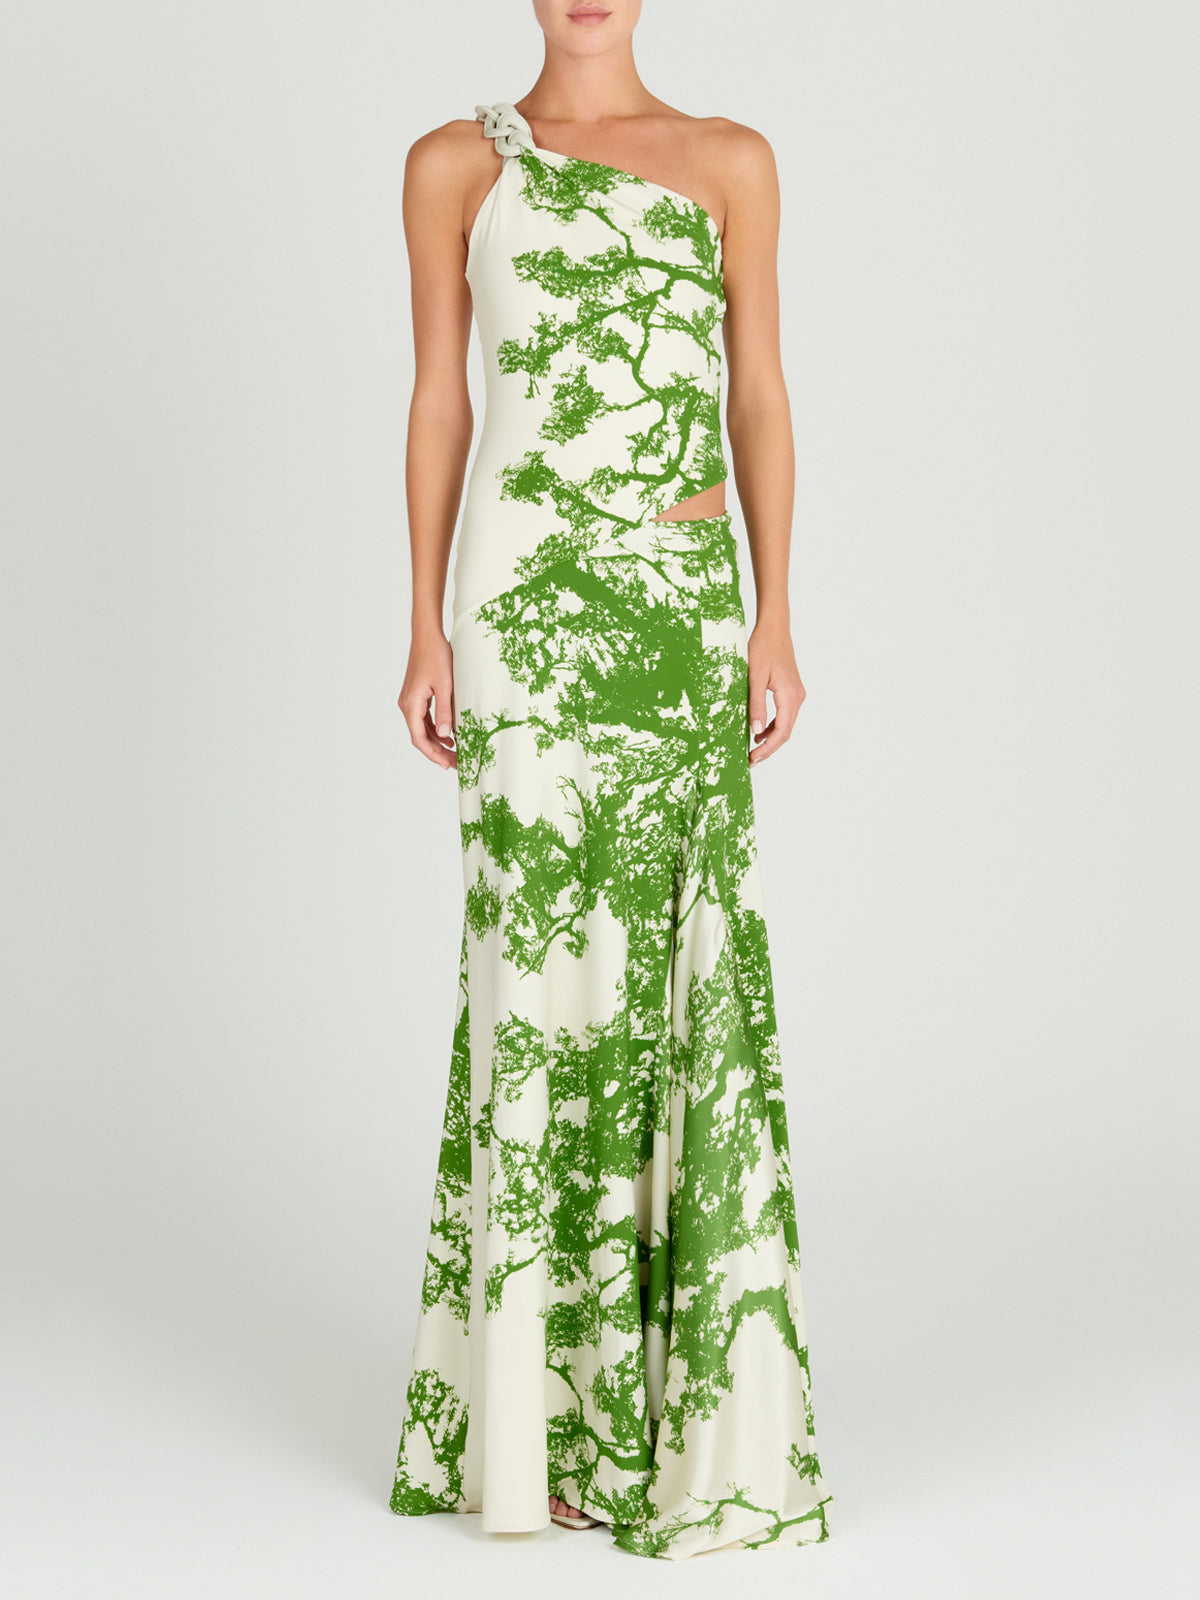 A Nix Dress Green Cyprus with a printed design.